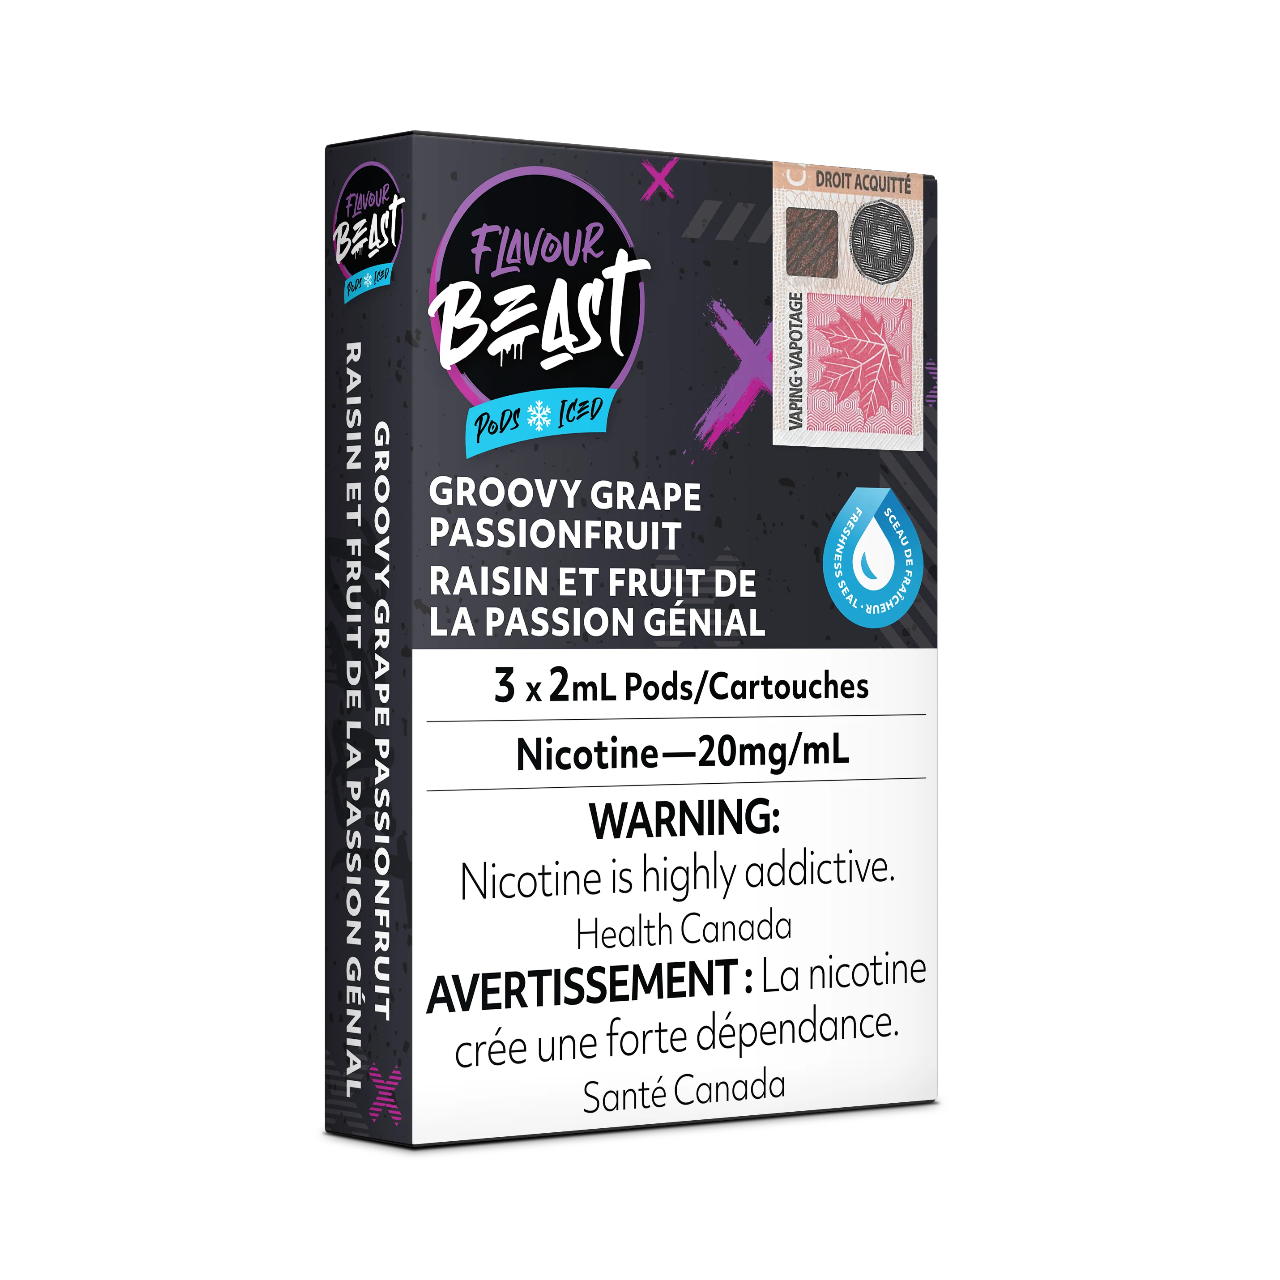 Flavour Beast Groovy Grape Passionfruit Pods Iced 3 x 2mL 20mg